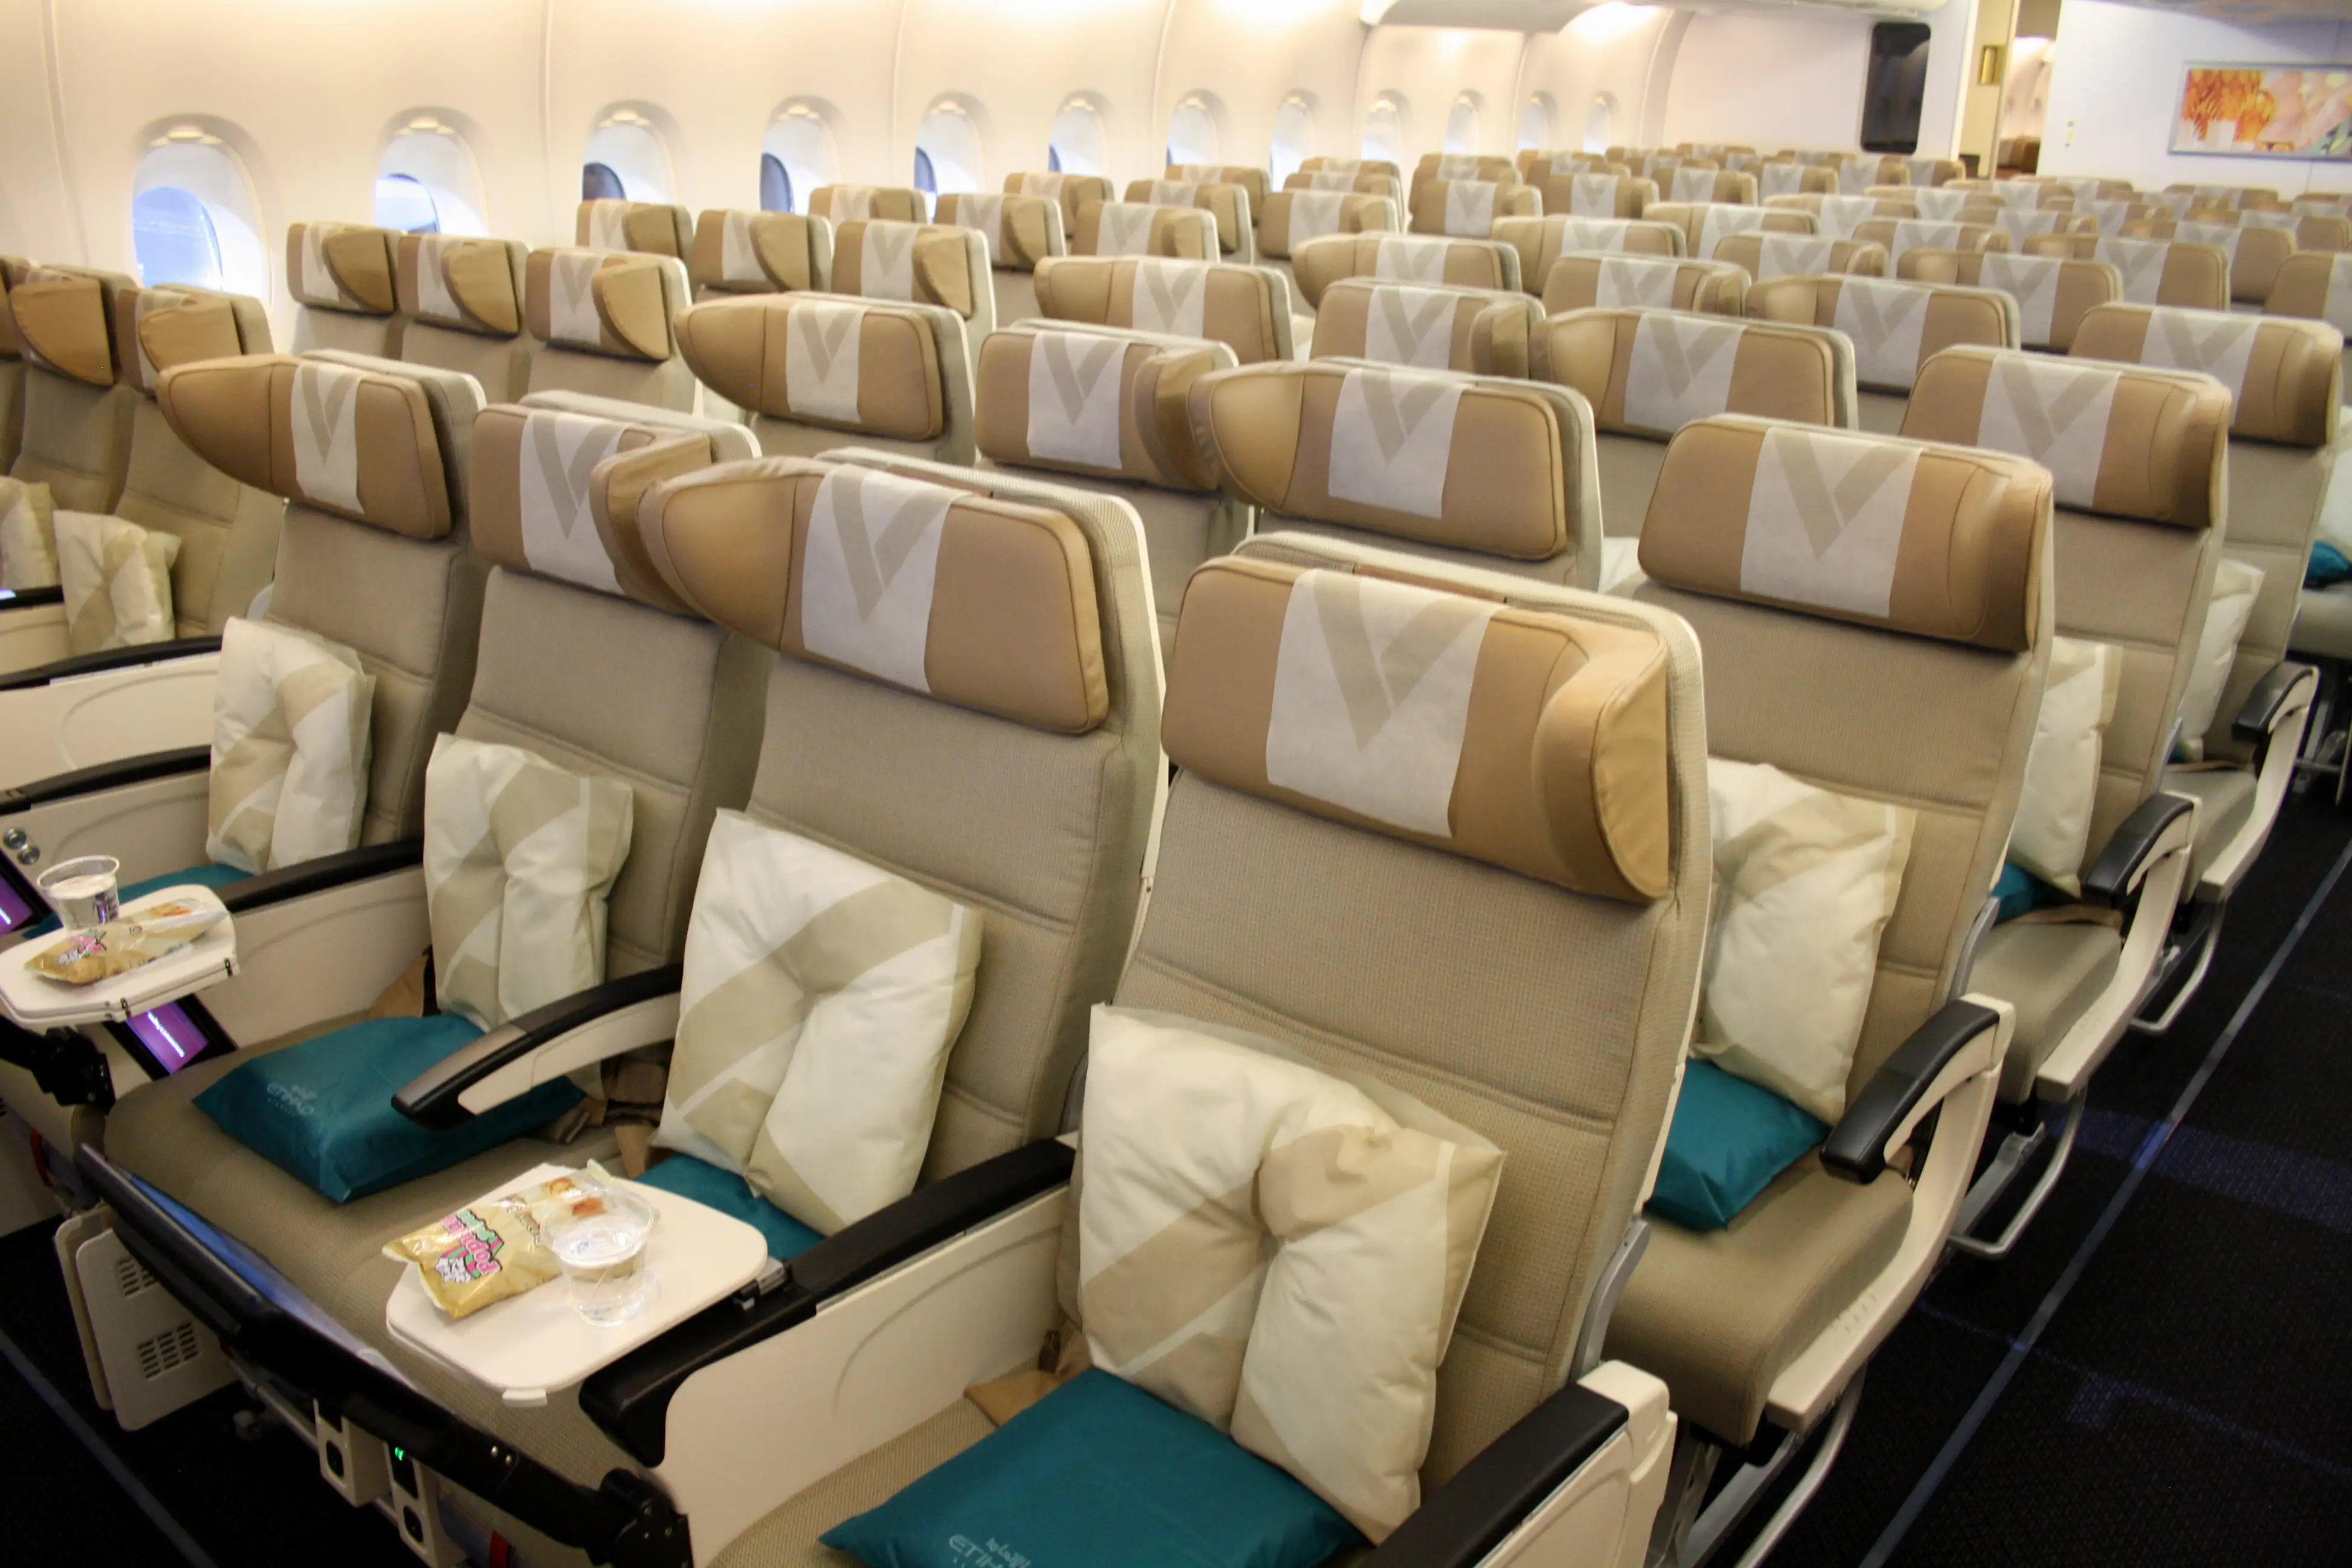 Etihad Airways unveils its first Airbus A380 aircraft in Abu Dhabi before it enters passenger service, with economy seats on the lower deck, December 18, 2014